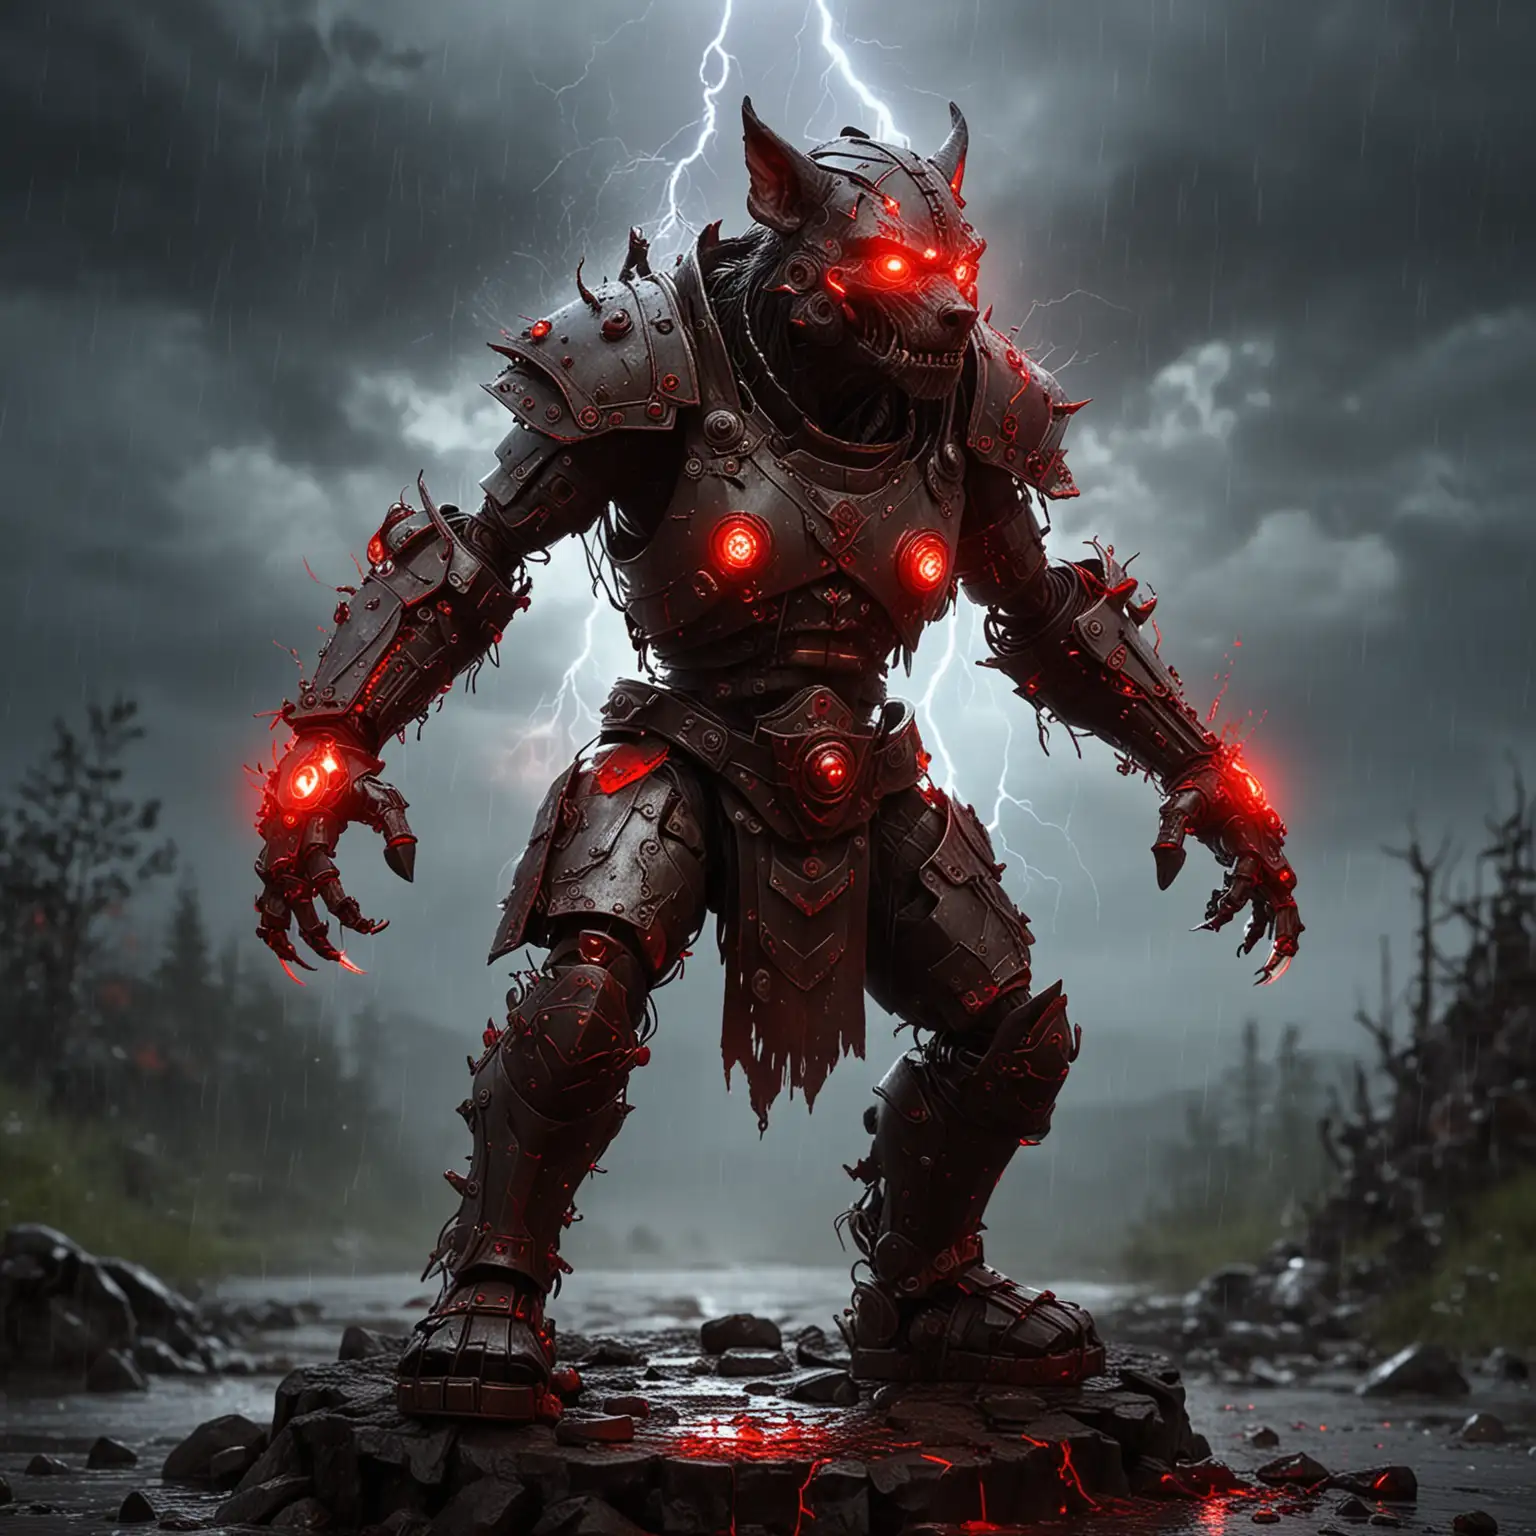 a robot werewolf-gnome cyborg, wearing ancient plate armor painted with glowing crimson red runes, powered and fueled by rivulets of blood magic, with gauntlets that crackle with lightning bolt energy.

He is silhouetted by the morning dawn on a stormy day